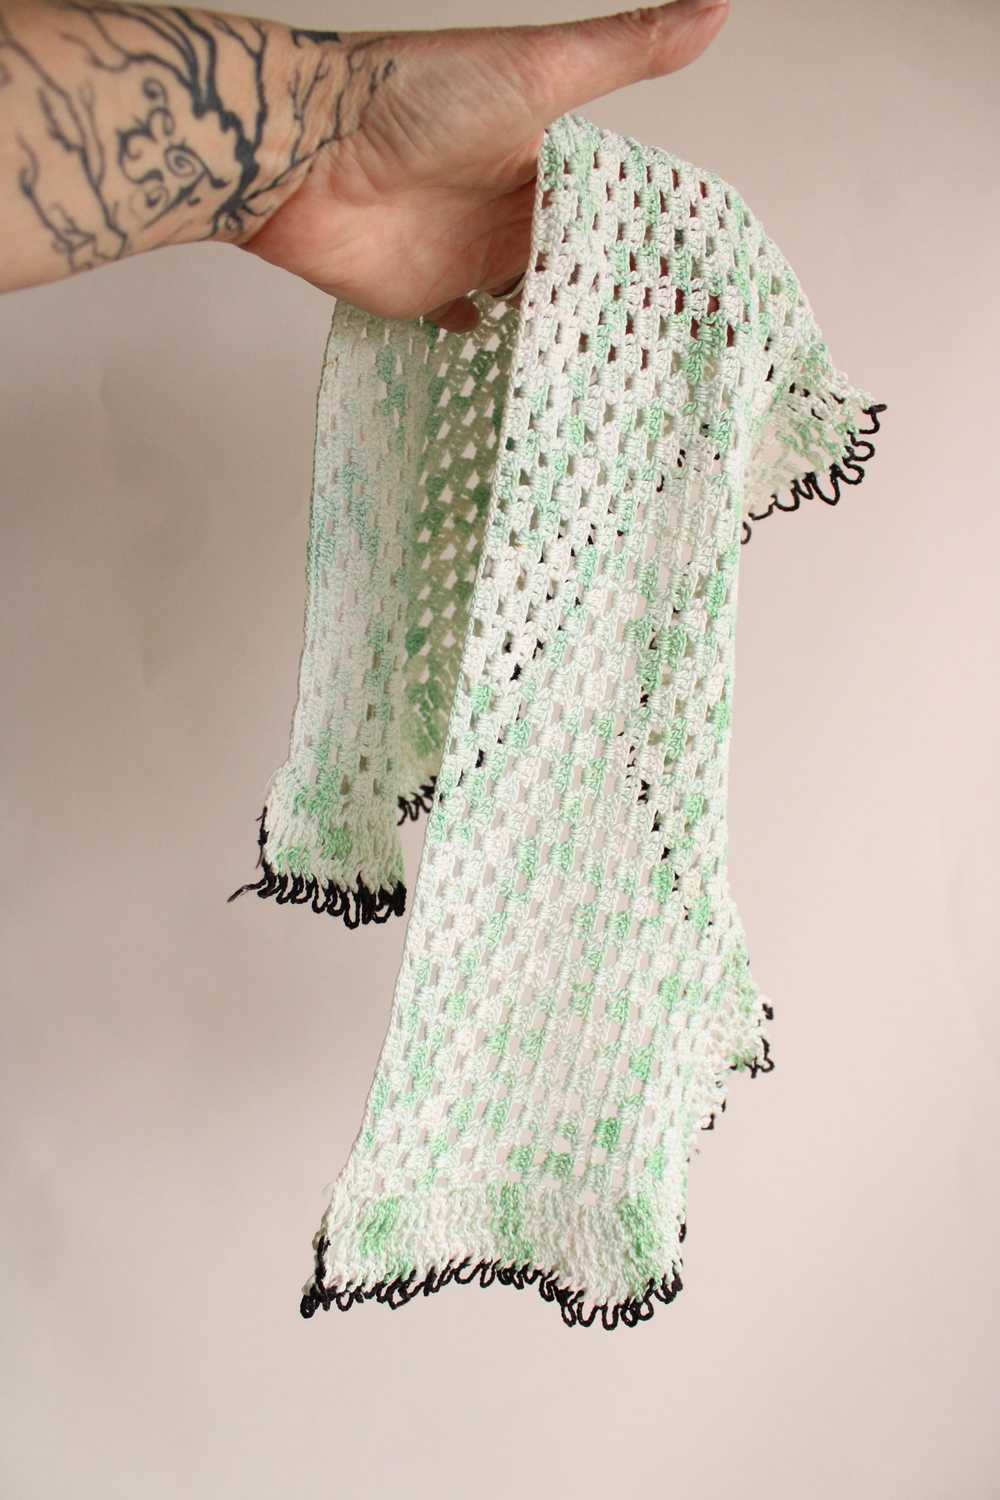 Vintage Crochet Doily in Green and White And Black - image 9